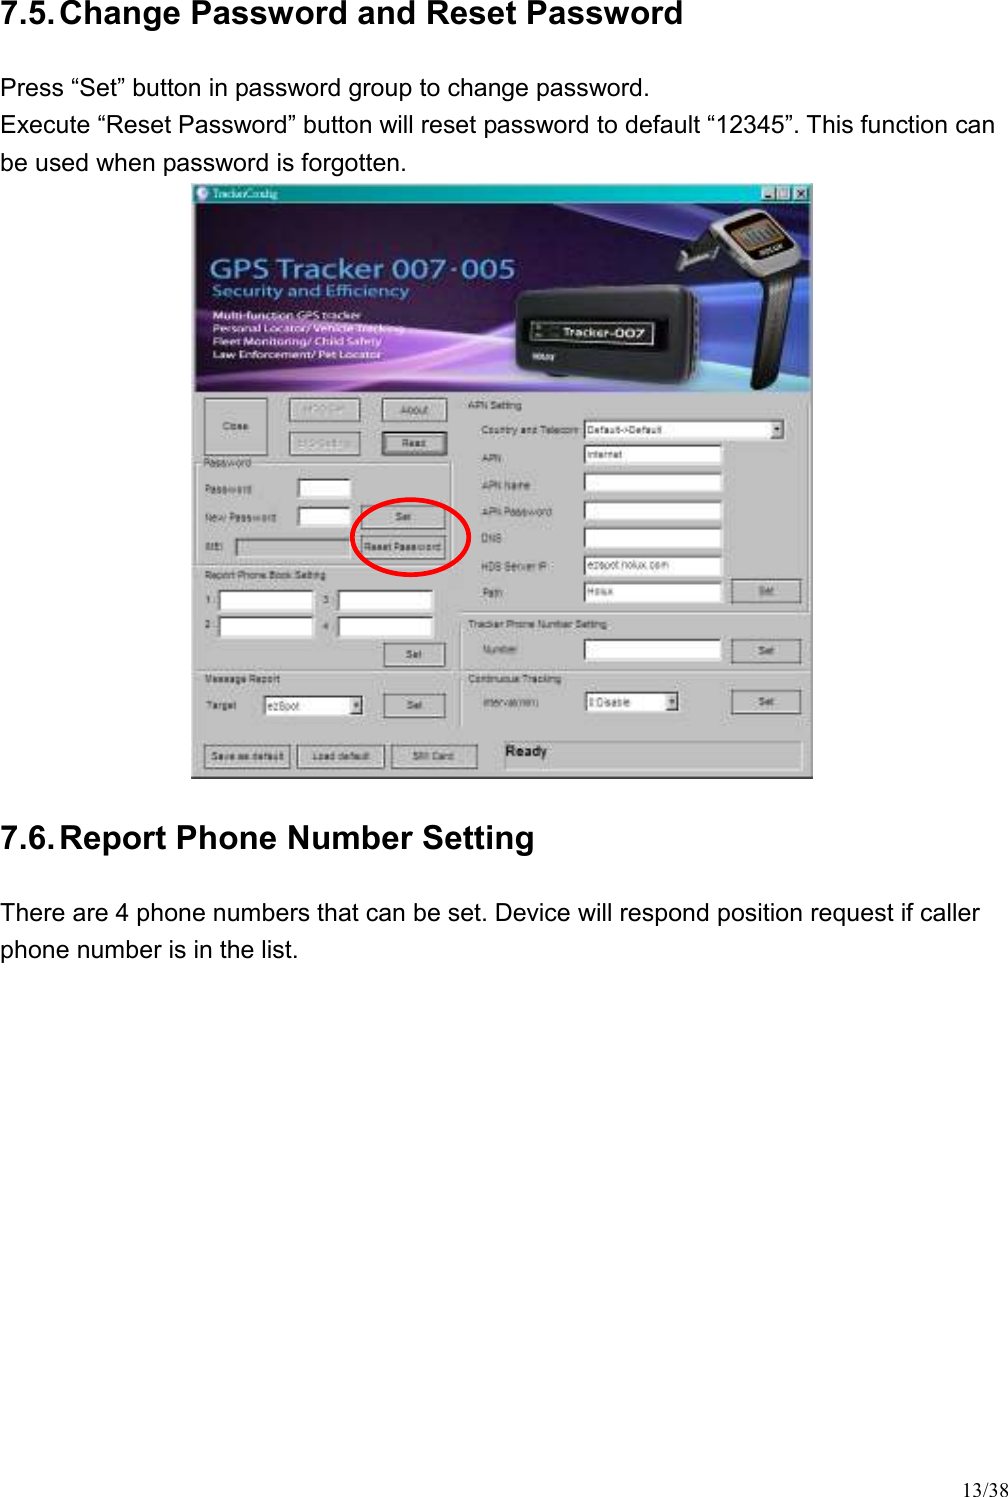 13/38 7.5. Change Password and Reset Password Press “Set” button in password group to change password. Execute “Reset Password” button will reset password to default “12345”. This function can be used when password is forgotten.  7.6. Report Phone Number Setting There are 4 phone numbers that can be set. Device will respond position request if caller phone number is in the list.  